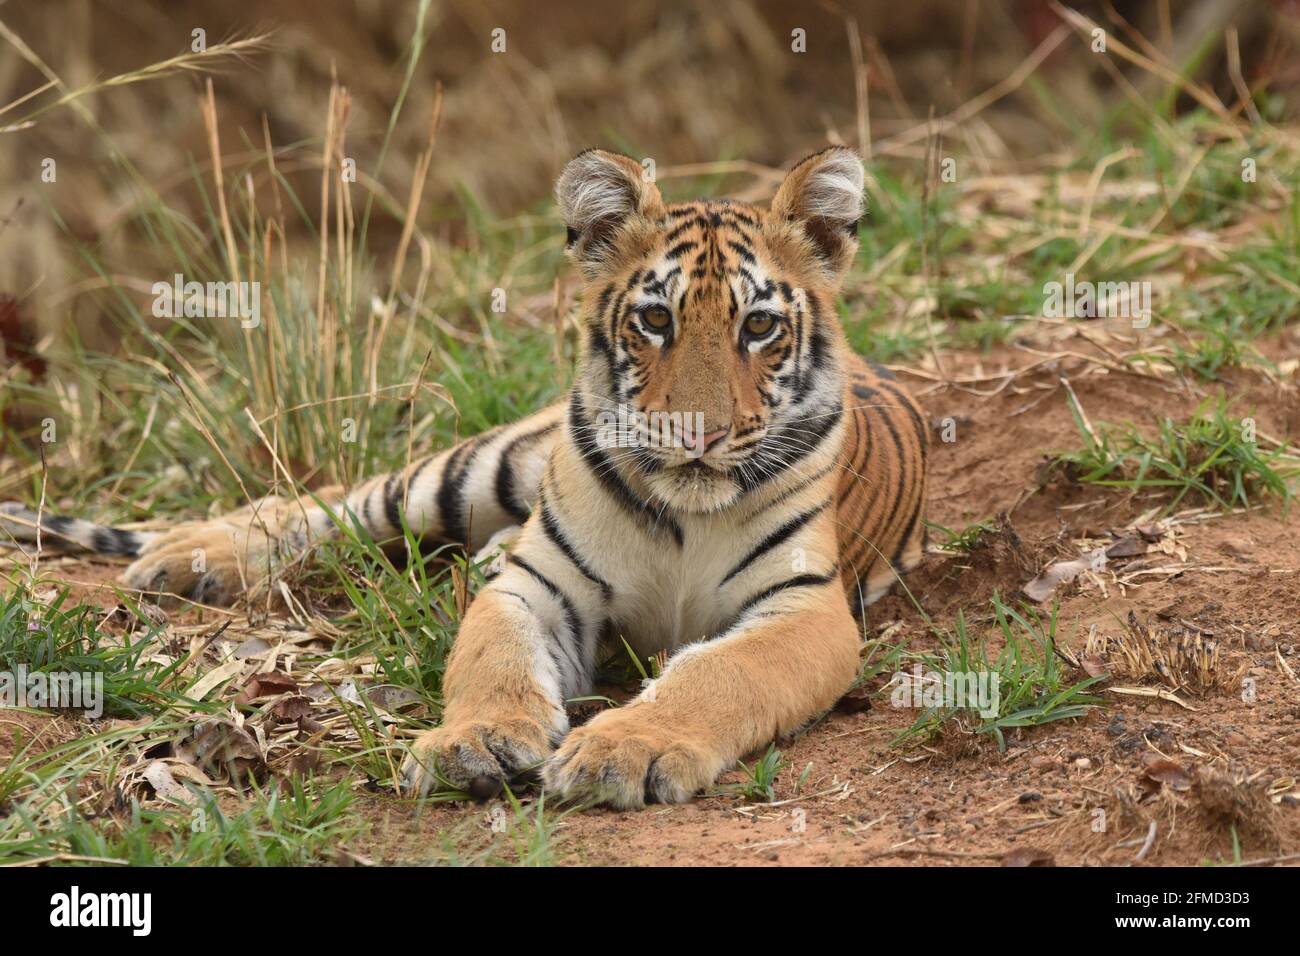 The Magnificent Tigress Arrowhead is queen Ranthambore Tiger Reserve. This photo was taken in morning while she is doing territory marking. Stock Photo